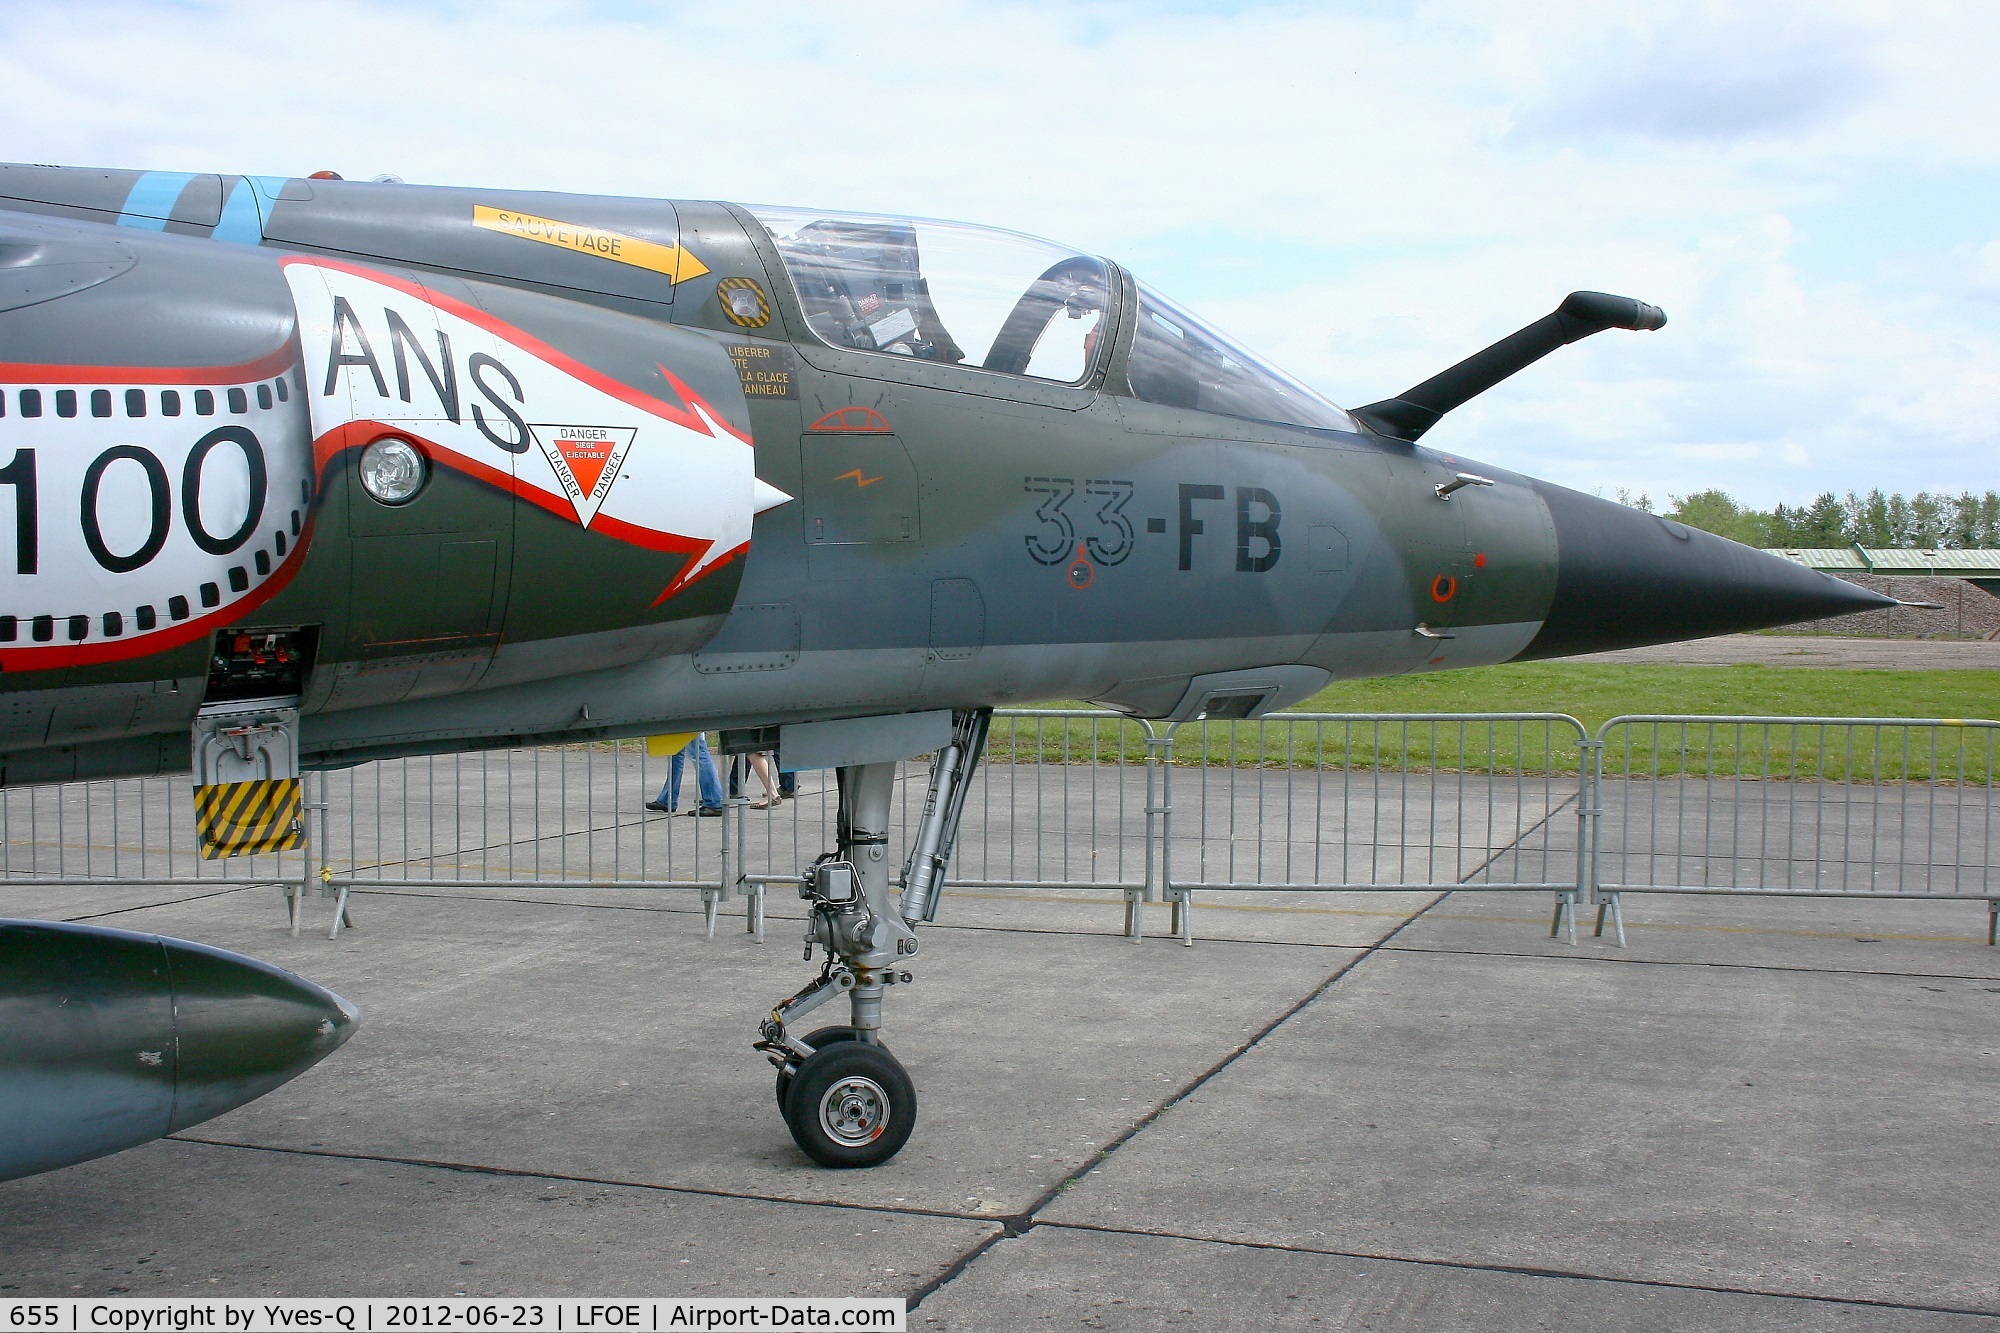 655, Dassault Mirage F.1CR C/N 655, Dassault Mirage F1CR (33-FB), Static display, Evreux-Fauville AB 105 (LFOE)